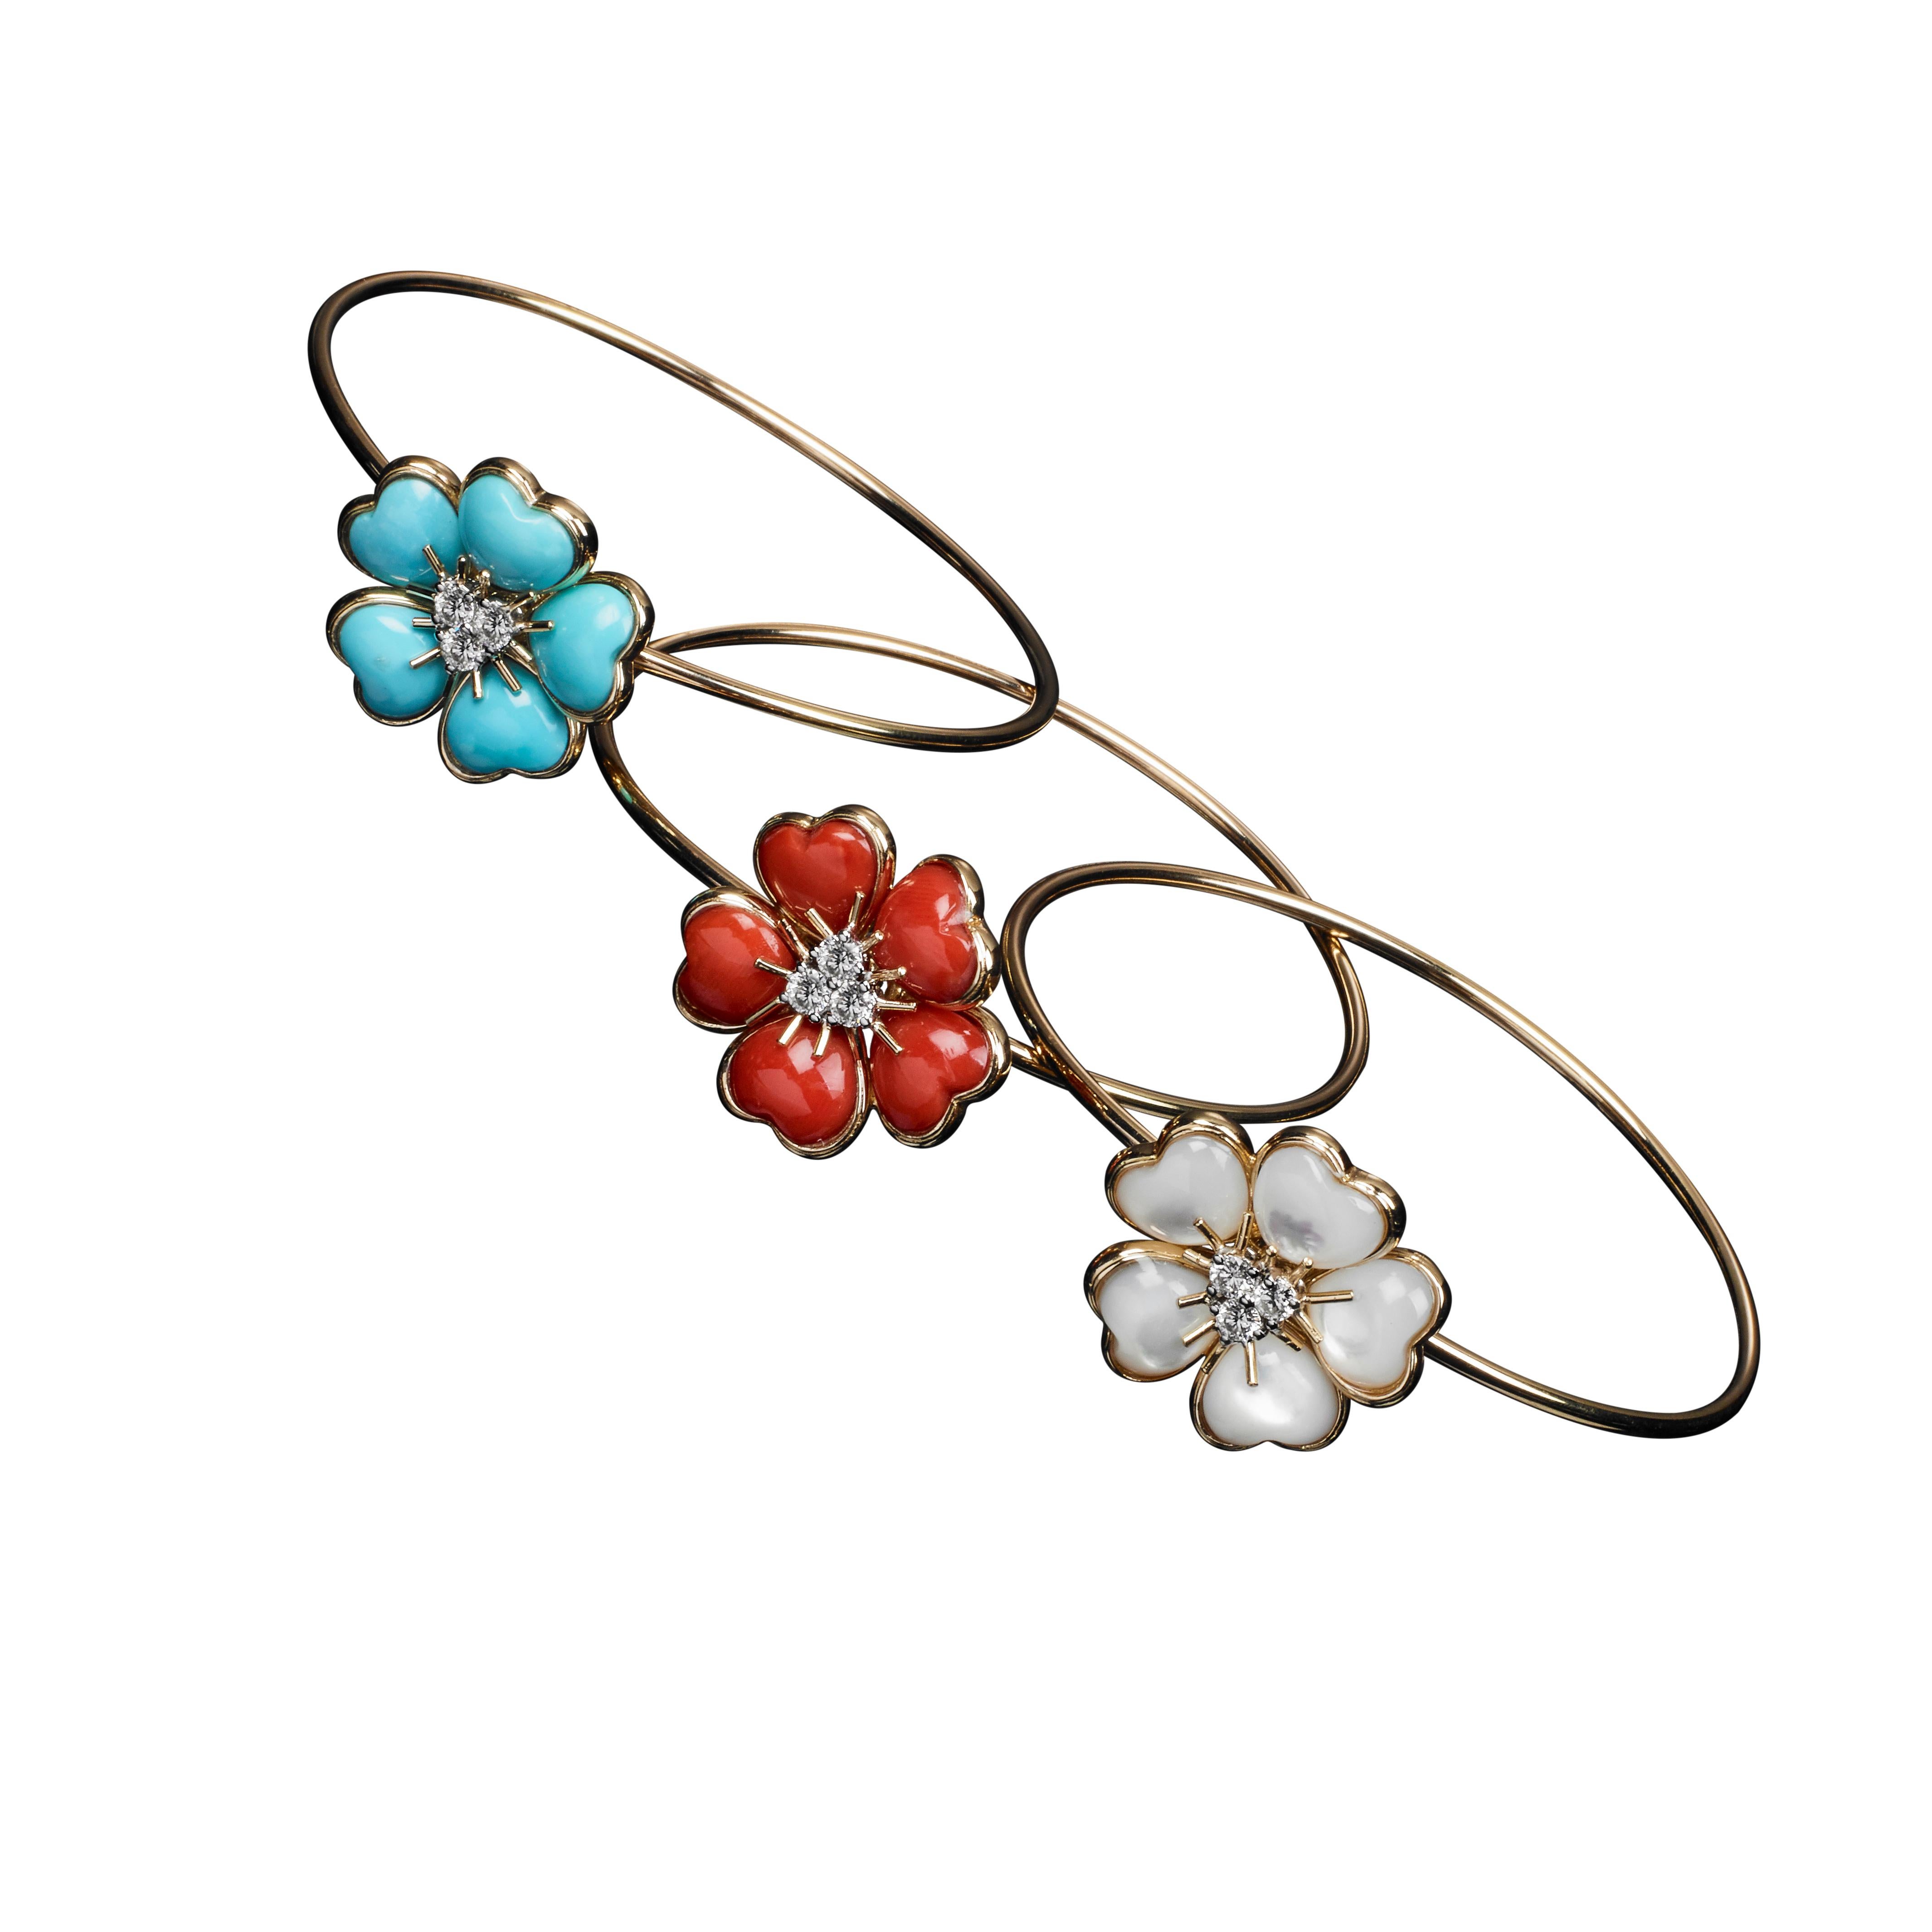 18 kt Yellow Gold Bracelet adorned with a nice and charming central flower featuring Red Coral Inlays, enriched with 0,32 carats of Brilliant-cut Diamonds, G colour, IF clarity.
The bracelet is part of the lovely, multi-coloured, joyful Collection: